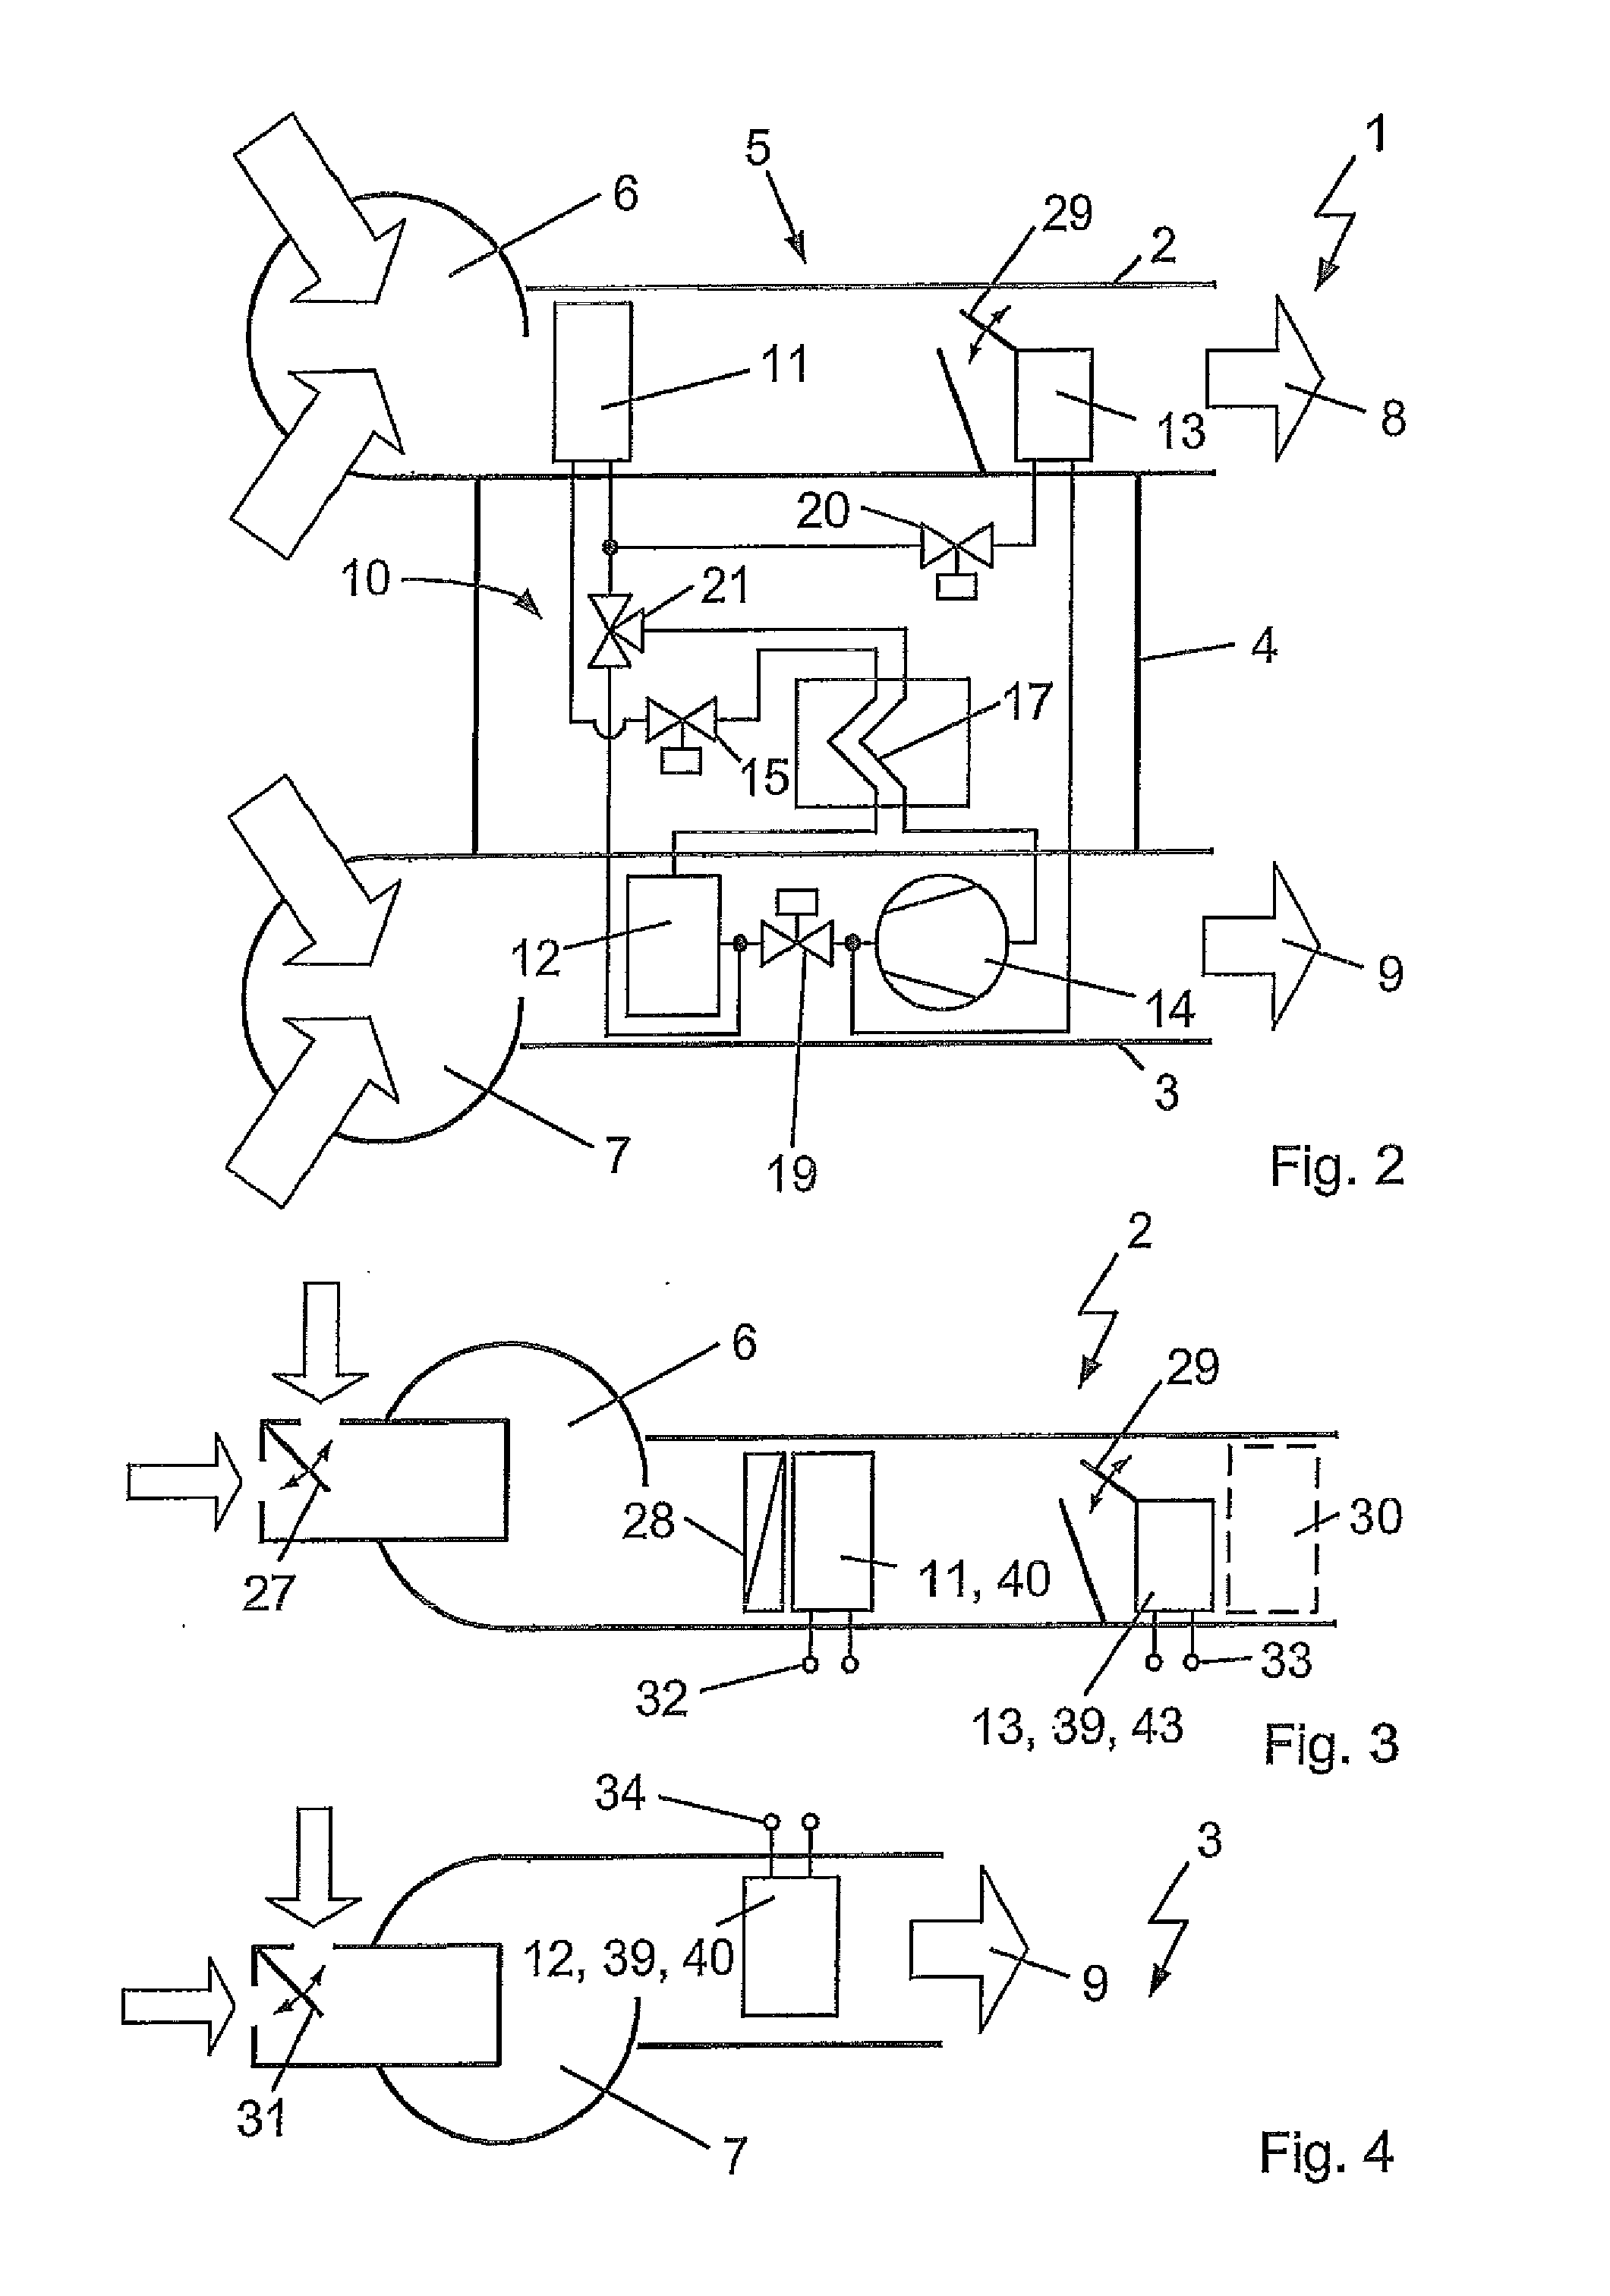 Compact HVAC system for a motor vehicle